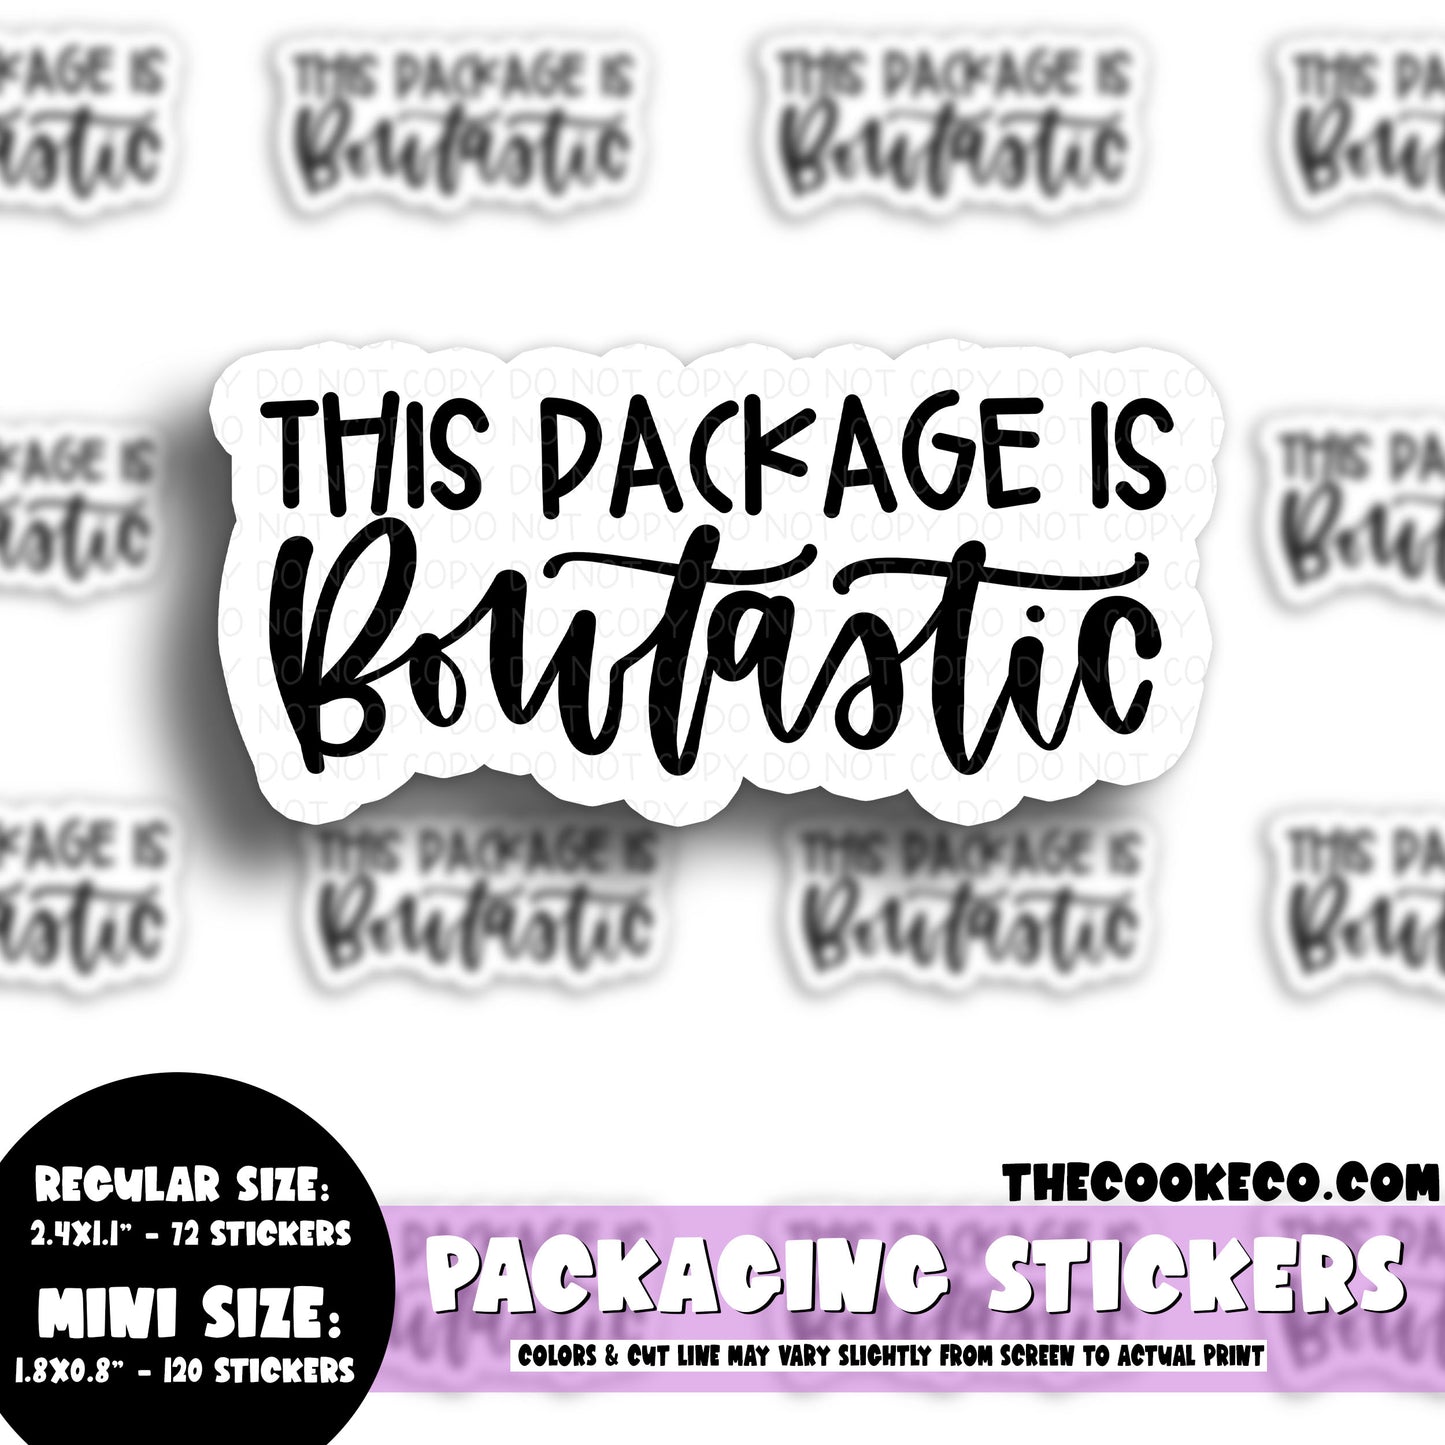 PTO Packaging Stickers | #BW0120 - THIS PACKAGE IS BOWTASTIC